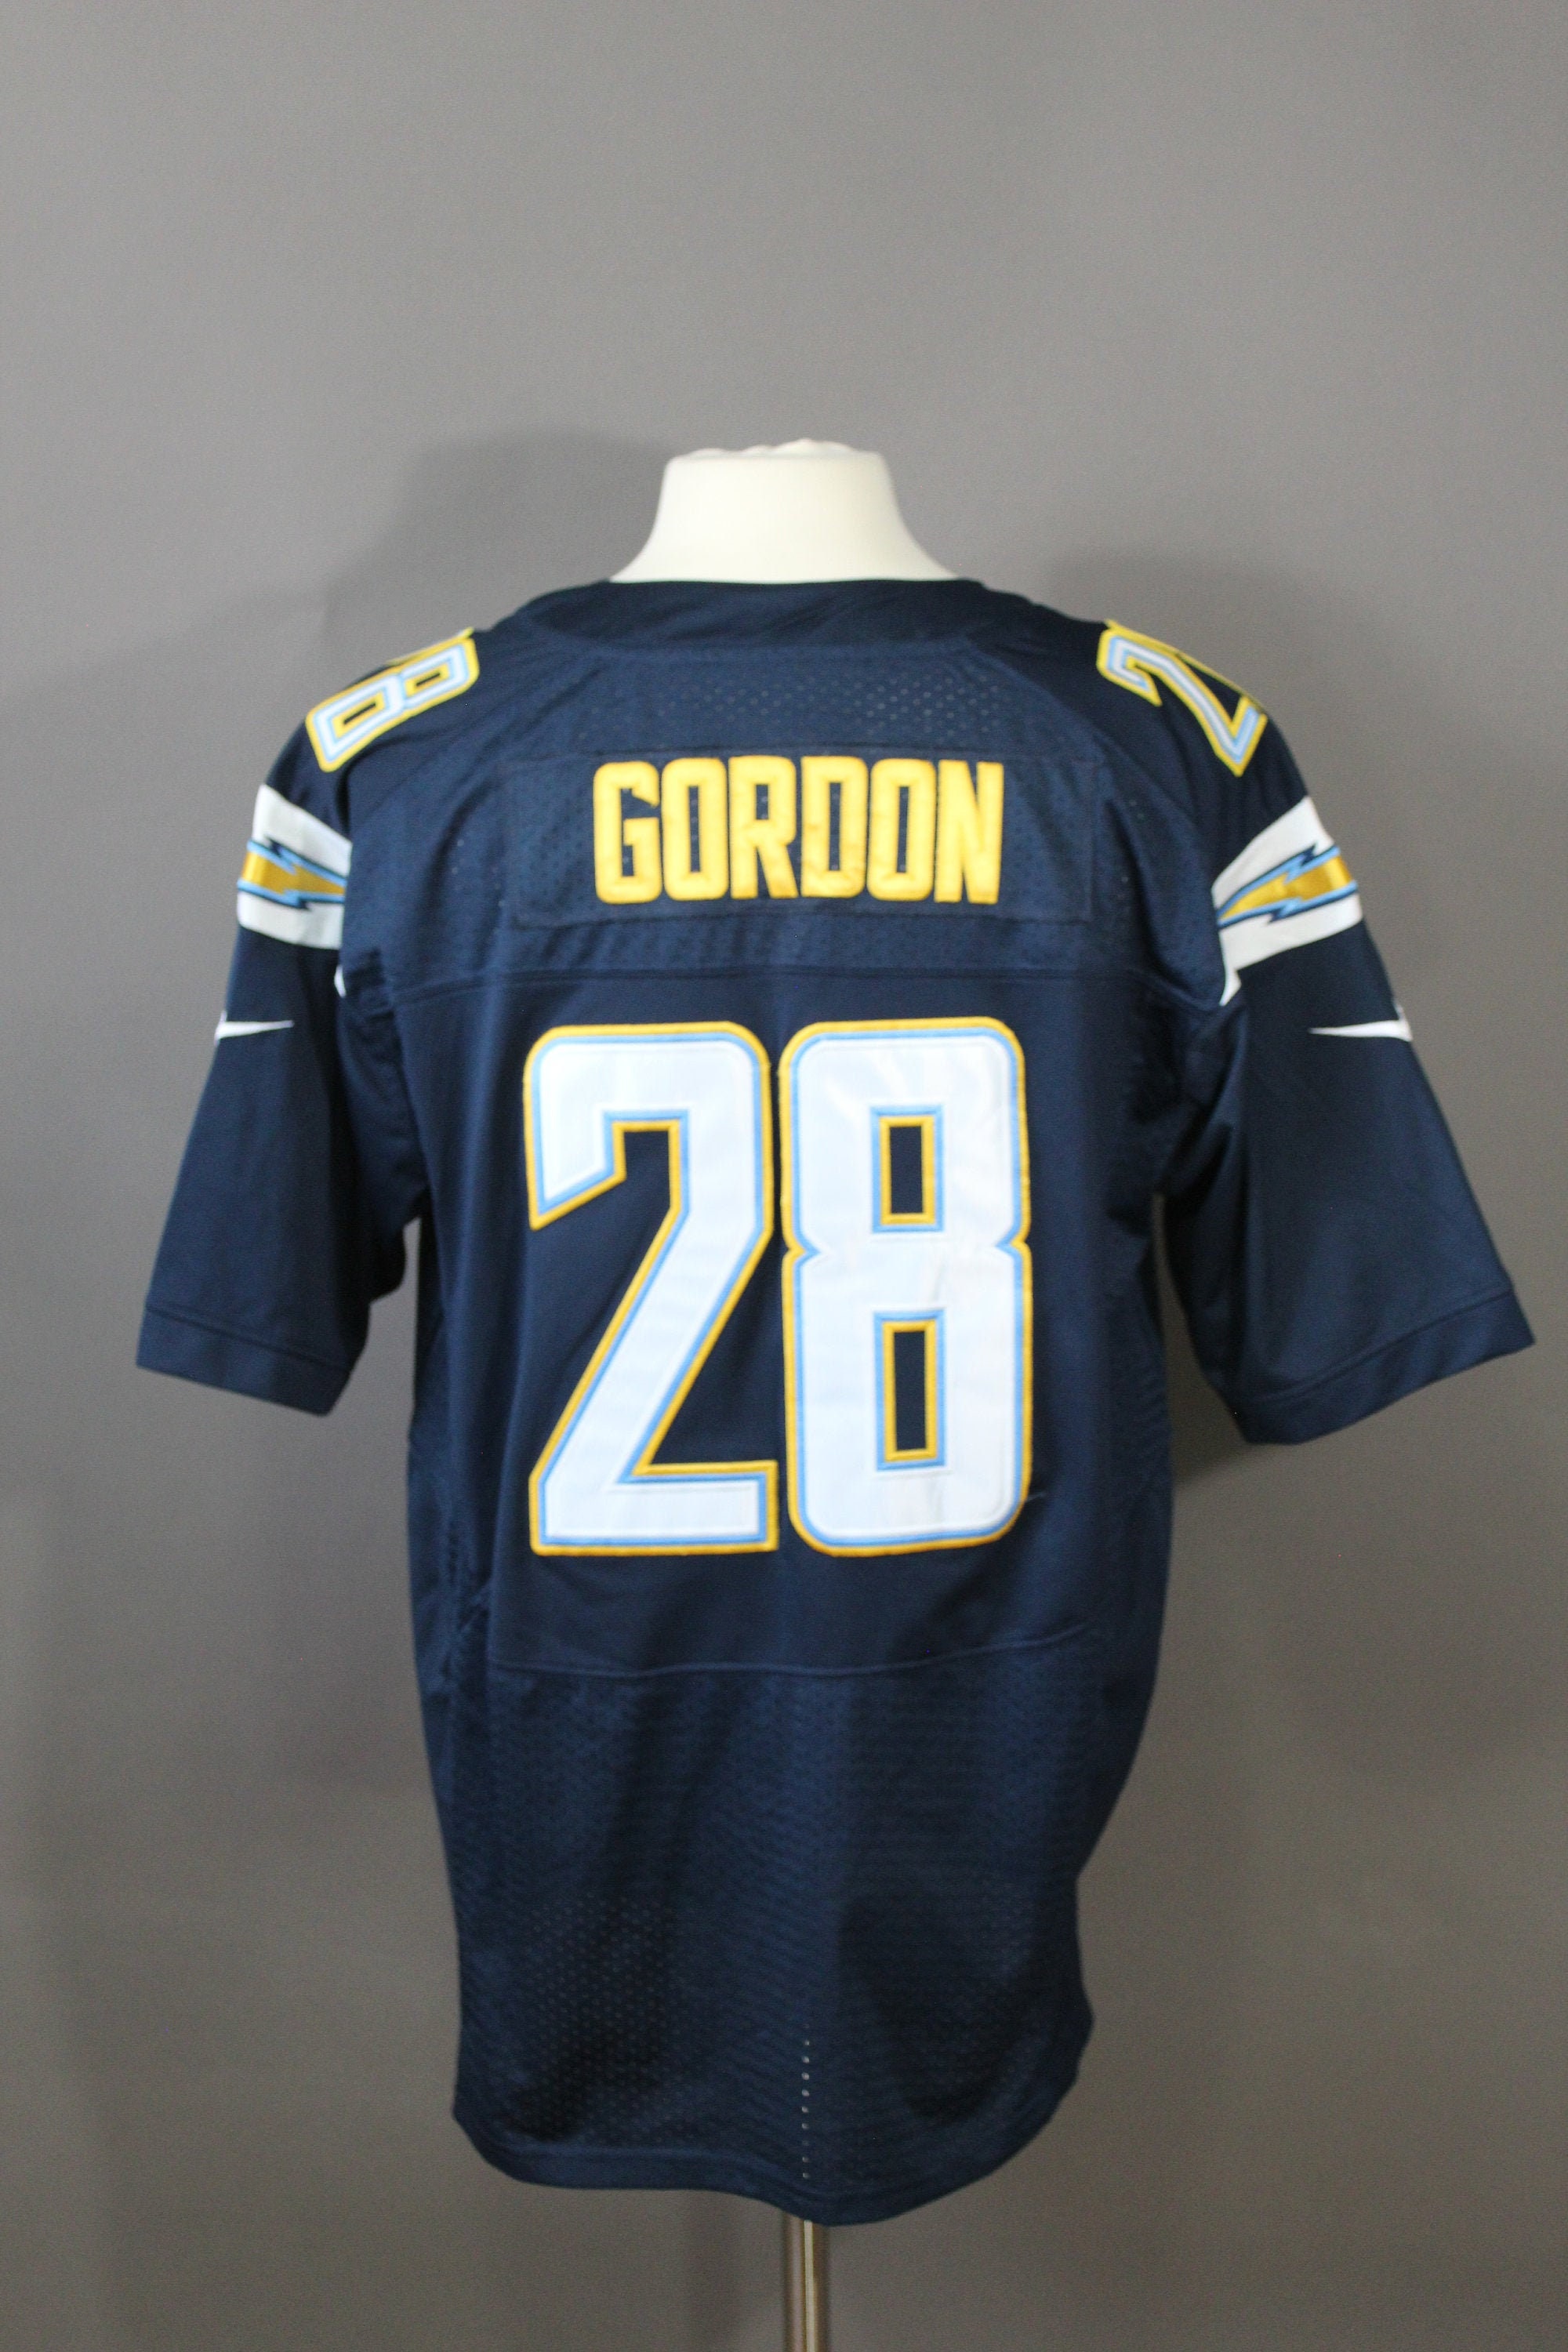 chargers jersey navy